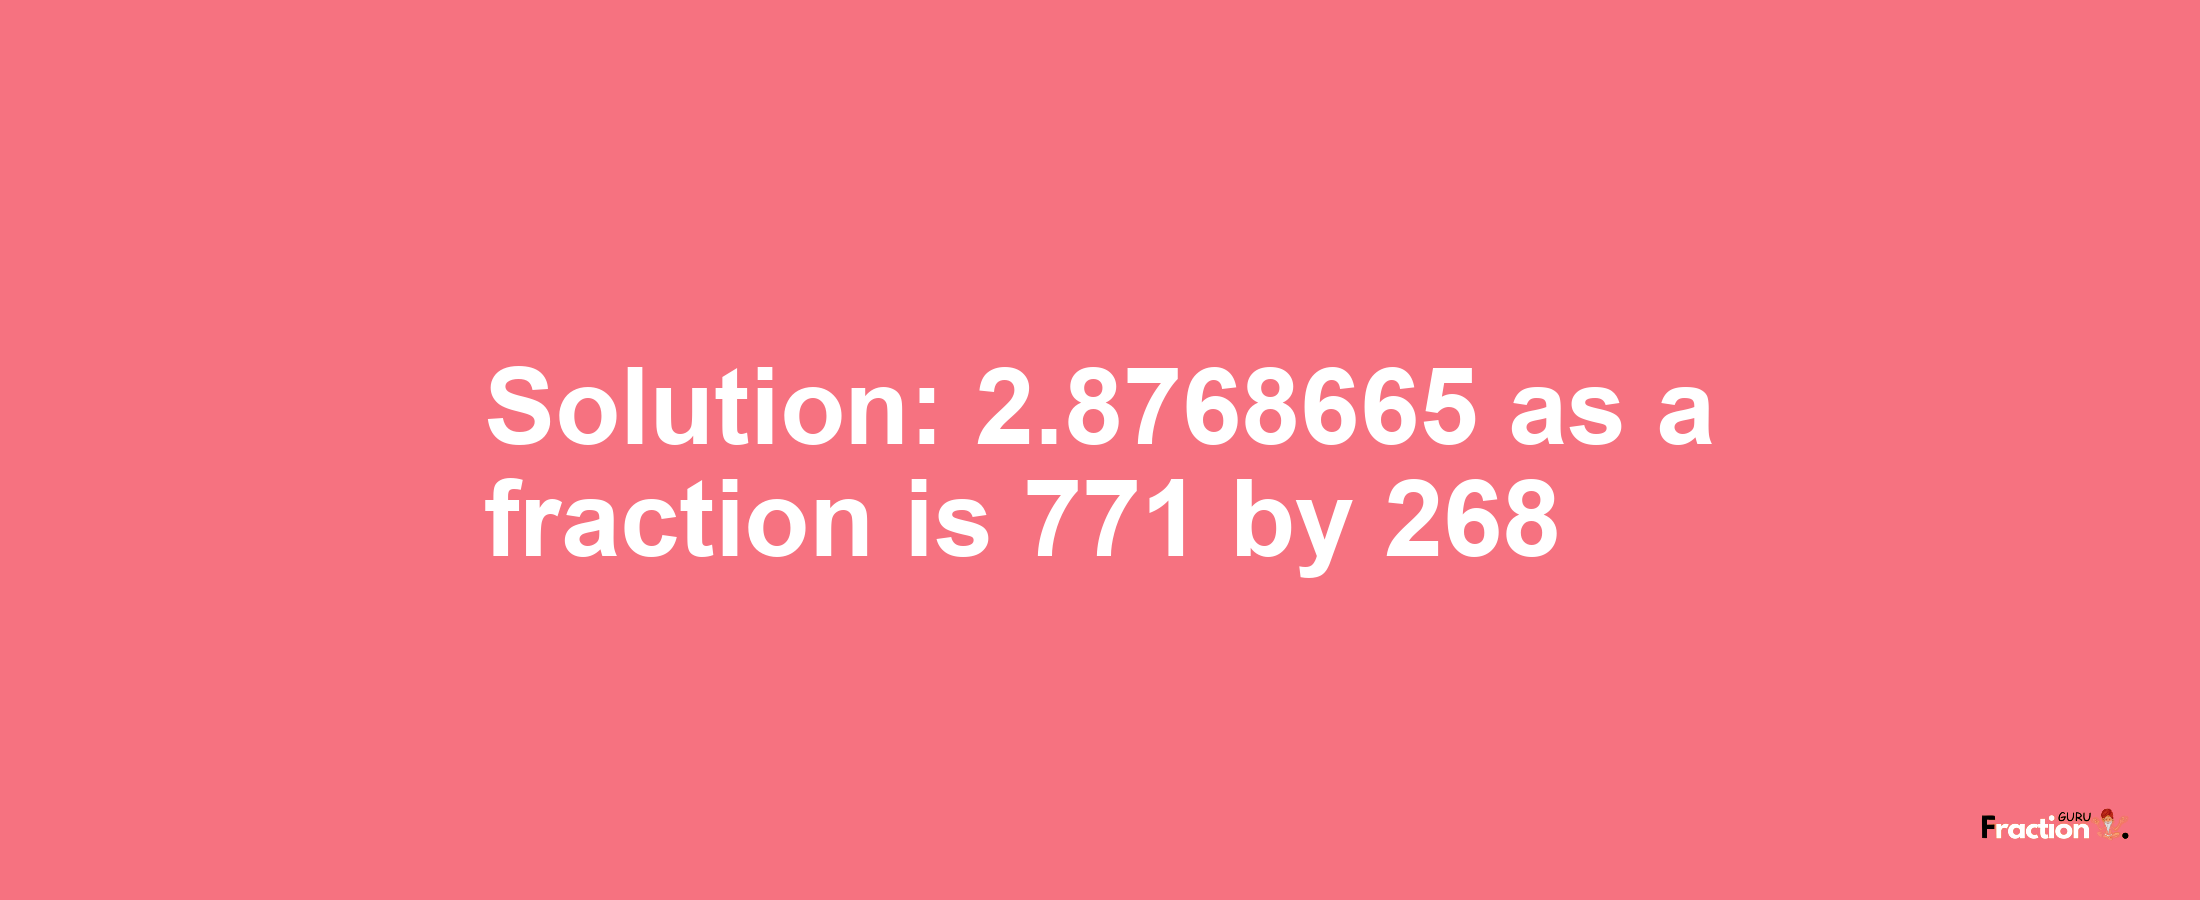 Solution:2.8768665 as a fraction is 771/268